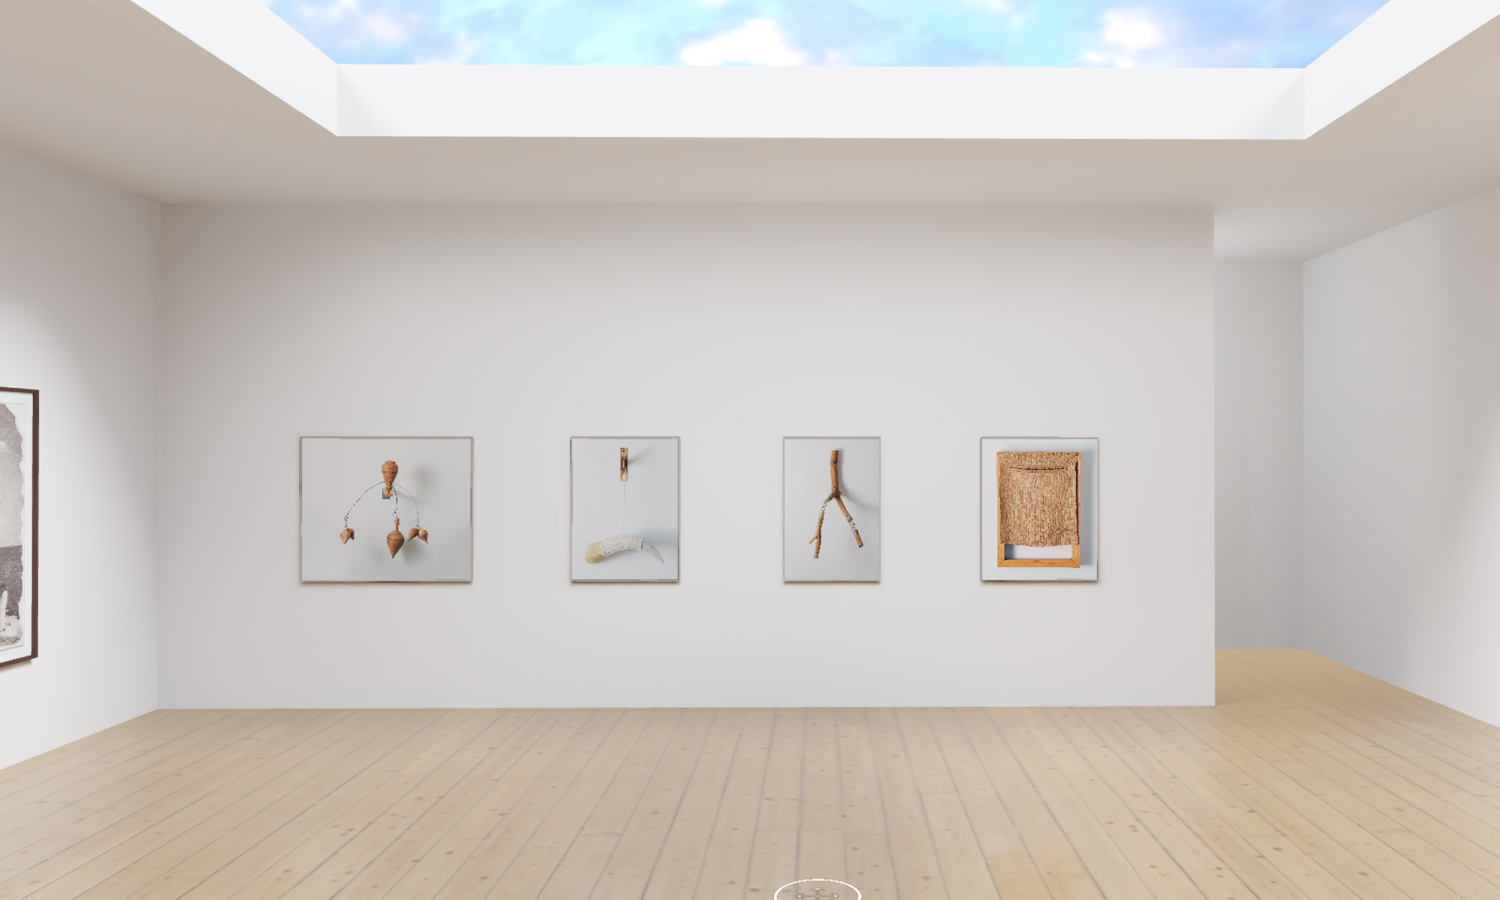 Installation image of an exhibition in a virtual gallery.